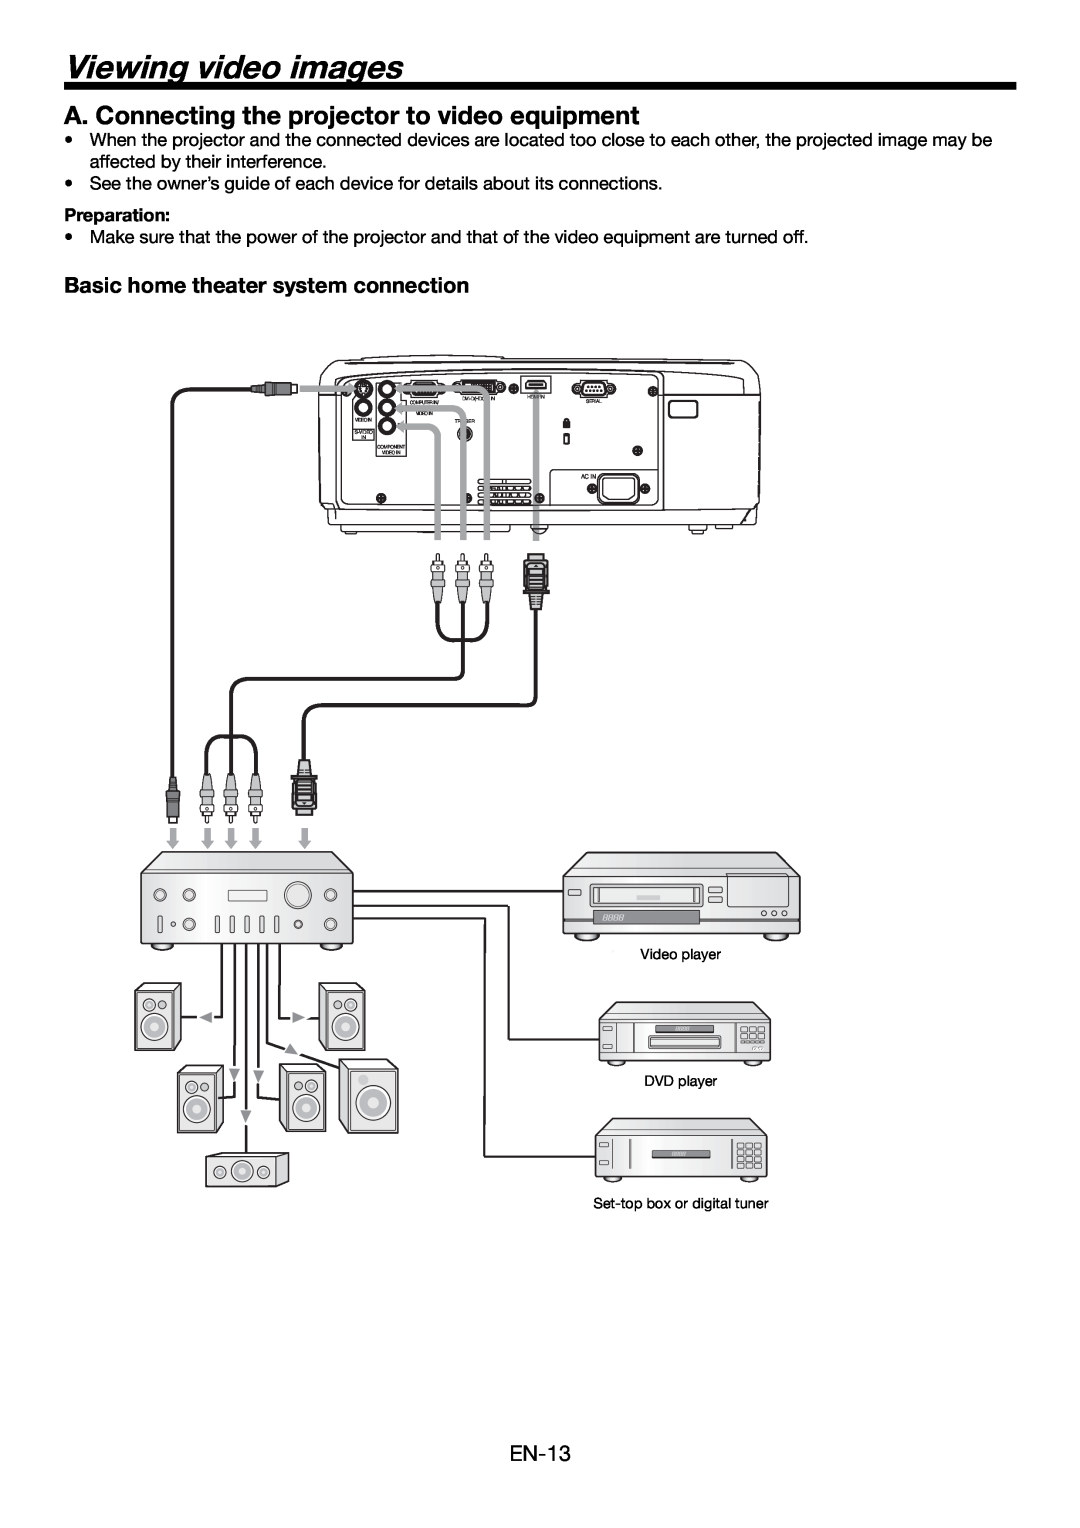 Mitsubishi Electronics HC4900 user manual Viewing video images, A. Connecting the projector to video equipment, Preparation 